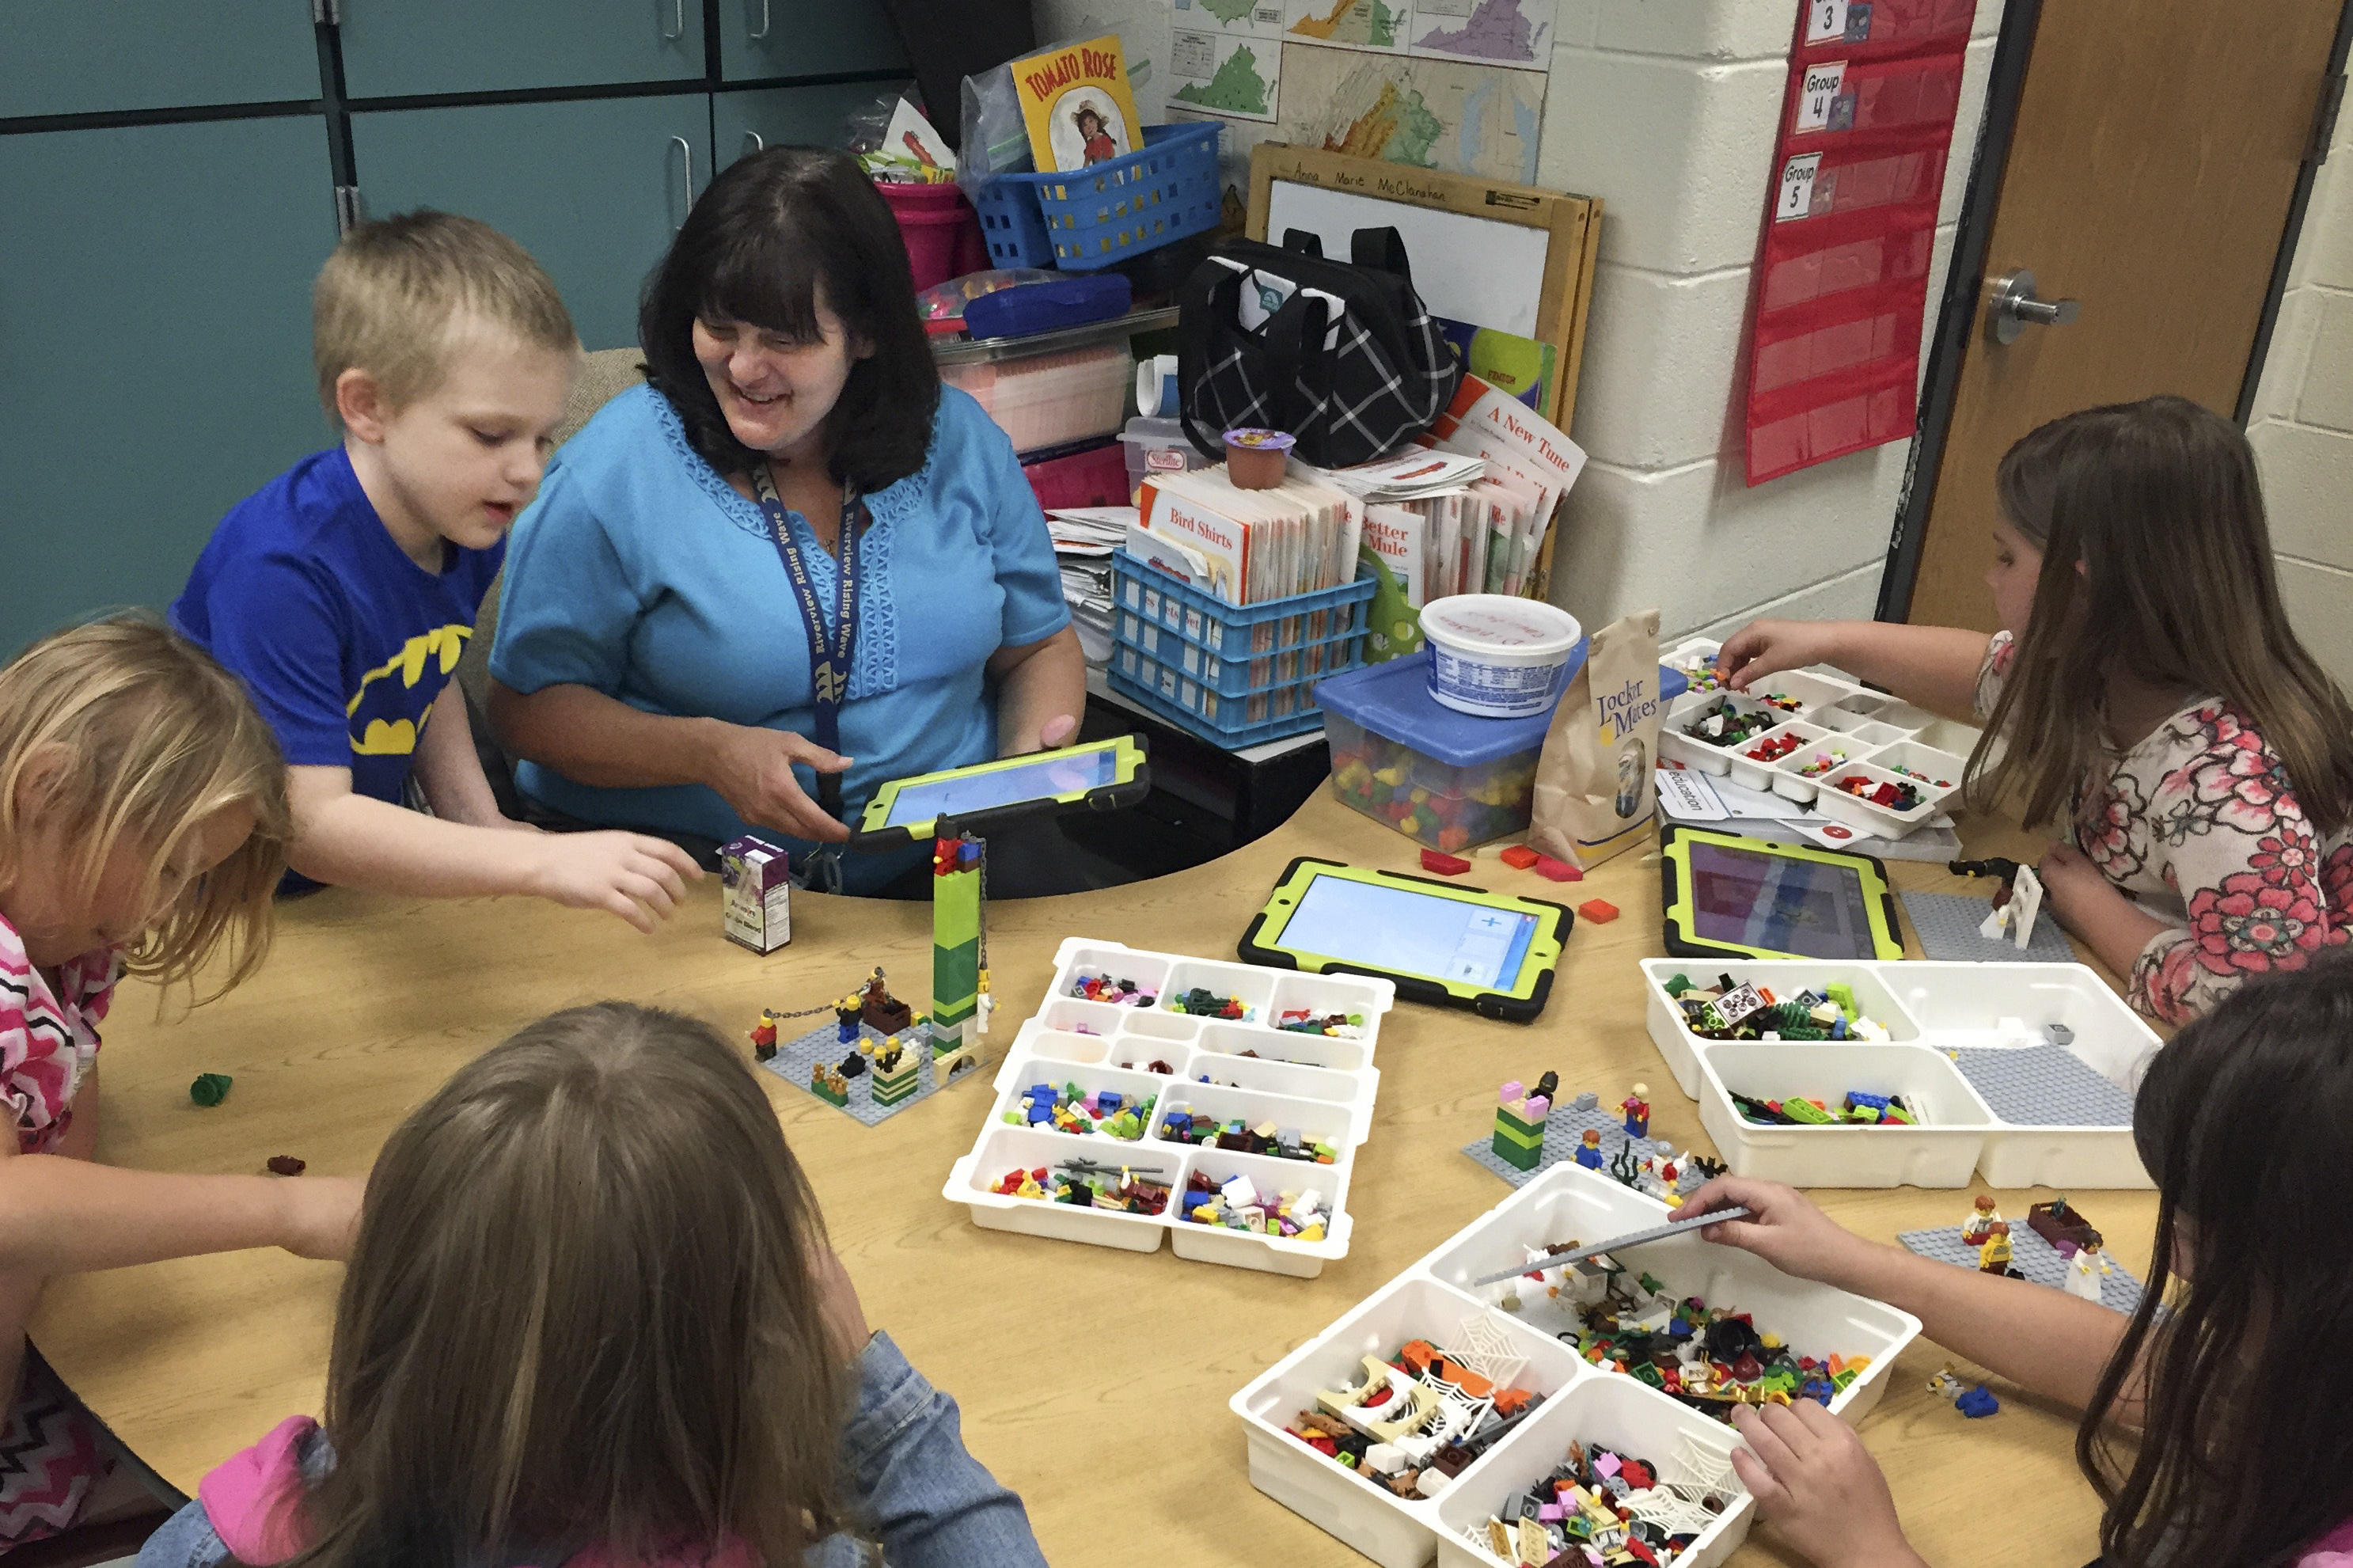 Anna Marie McClanahan (center) helps children write stories by using Legos to create scenes. (Photo by Pam Fessler, NPR)